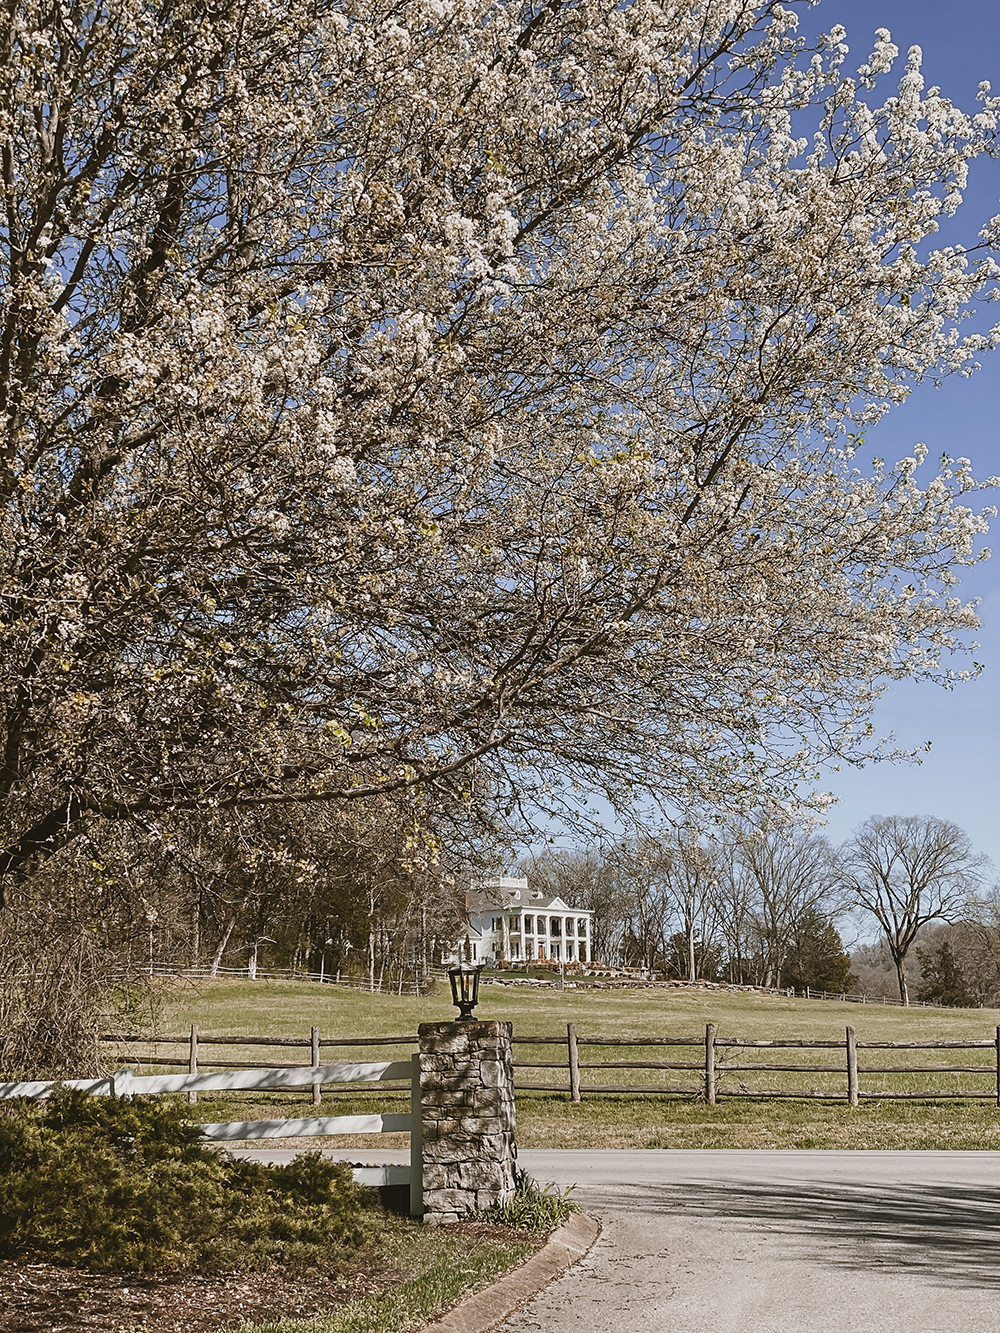 Spring time in Franklin Tennessee just outside of Nashville. The spring blossoms have bloomed and the country drives are a plenty.